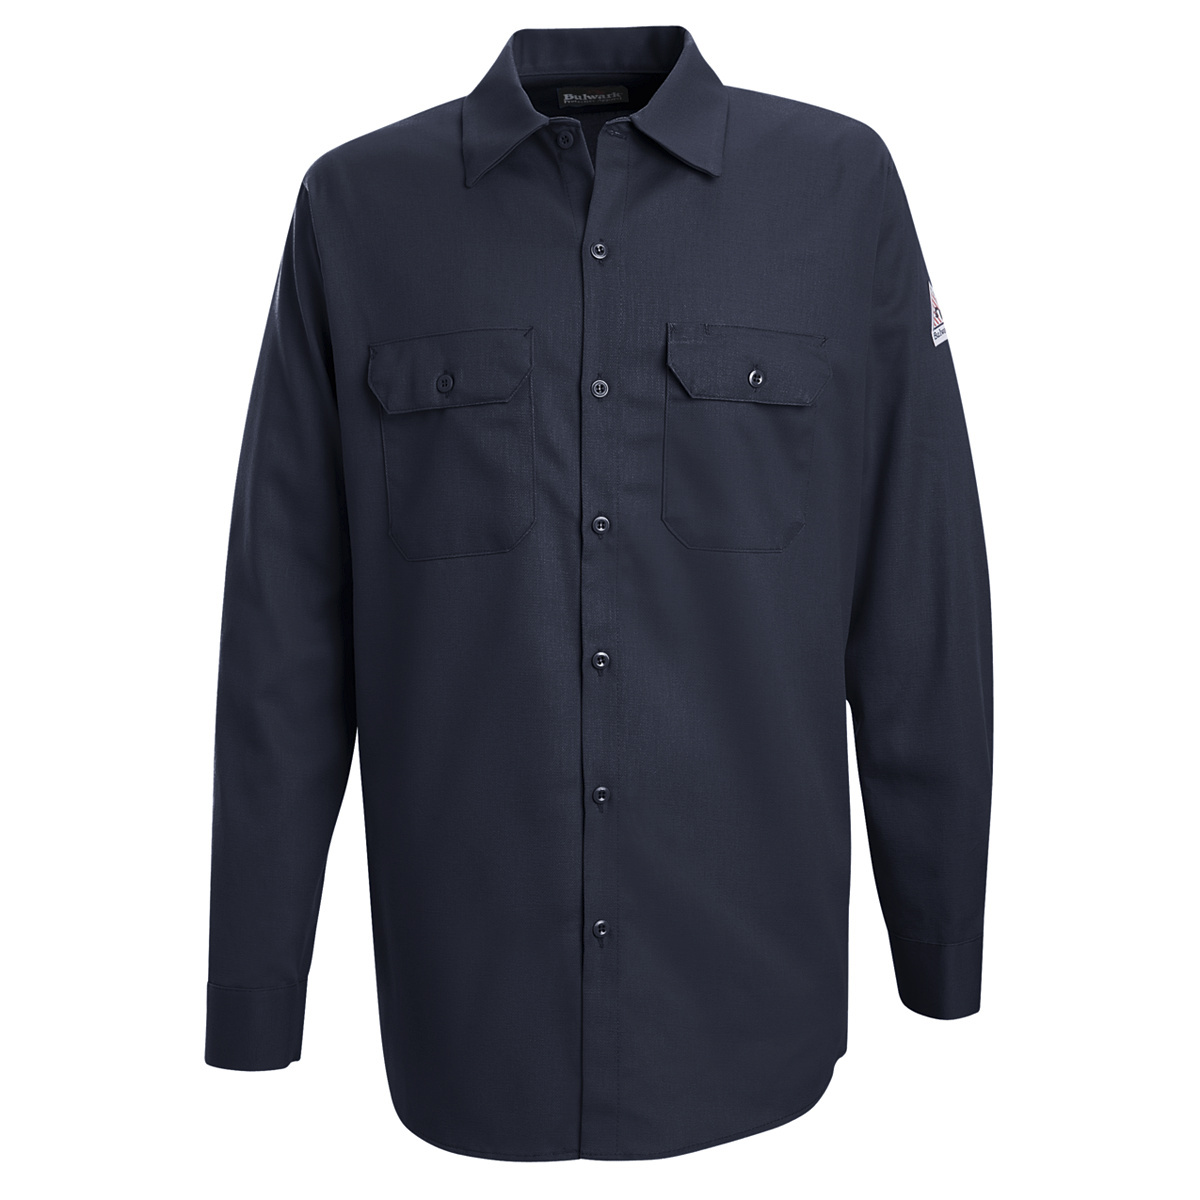 Bulwark® Medium Tall Navy Blue EXCEL FR® Cotton Flame Resistant Work Shirt With Button Front Closure